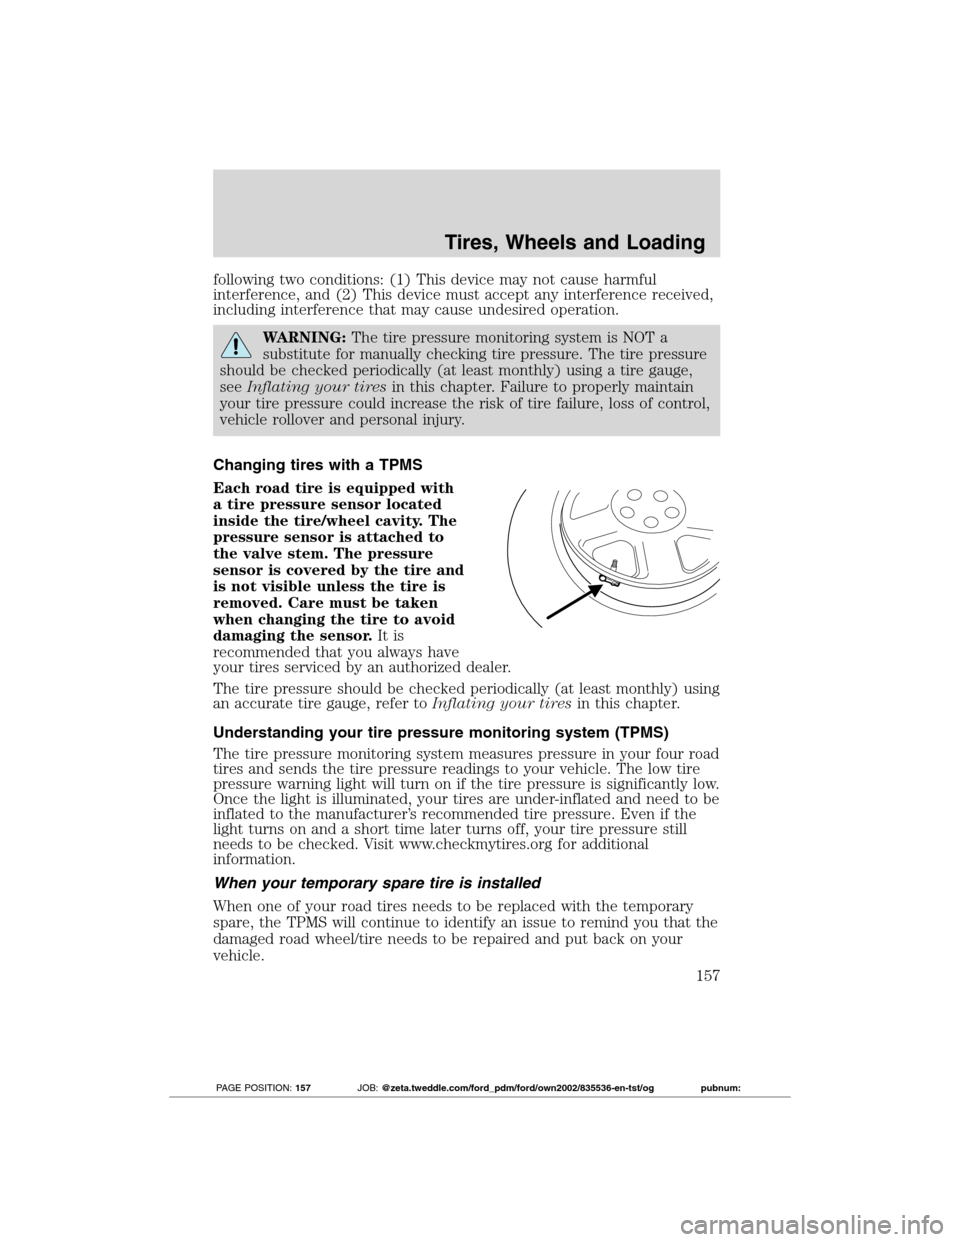 FORD TRANSIT CONNECT 2012 1.G Owners Manual following two conditions: (1) This device may not cause harmful
interference, and (2) This device must accept any interference received,
including interference that may cause undesired operation.
WARN